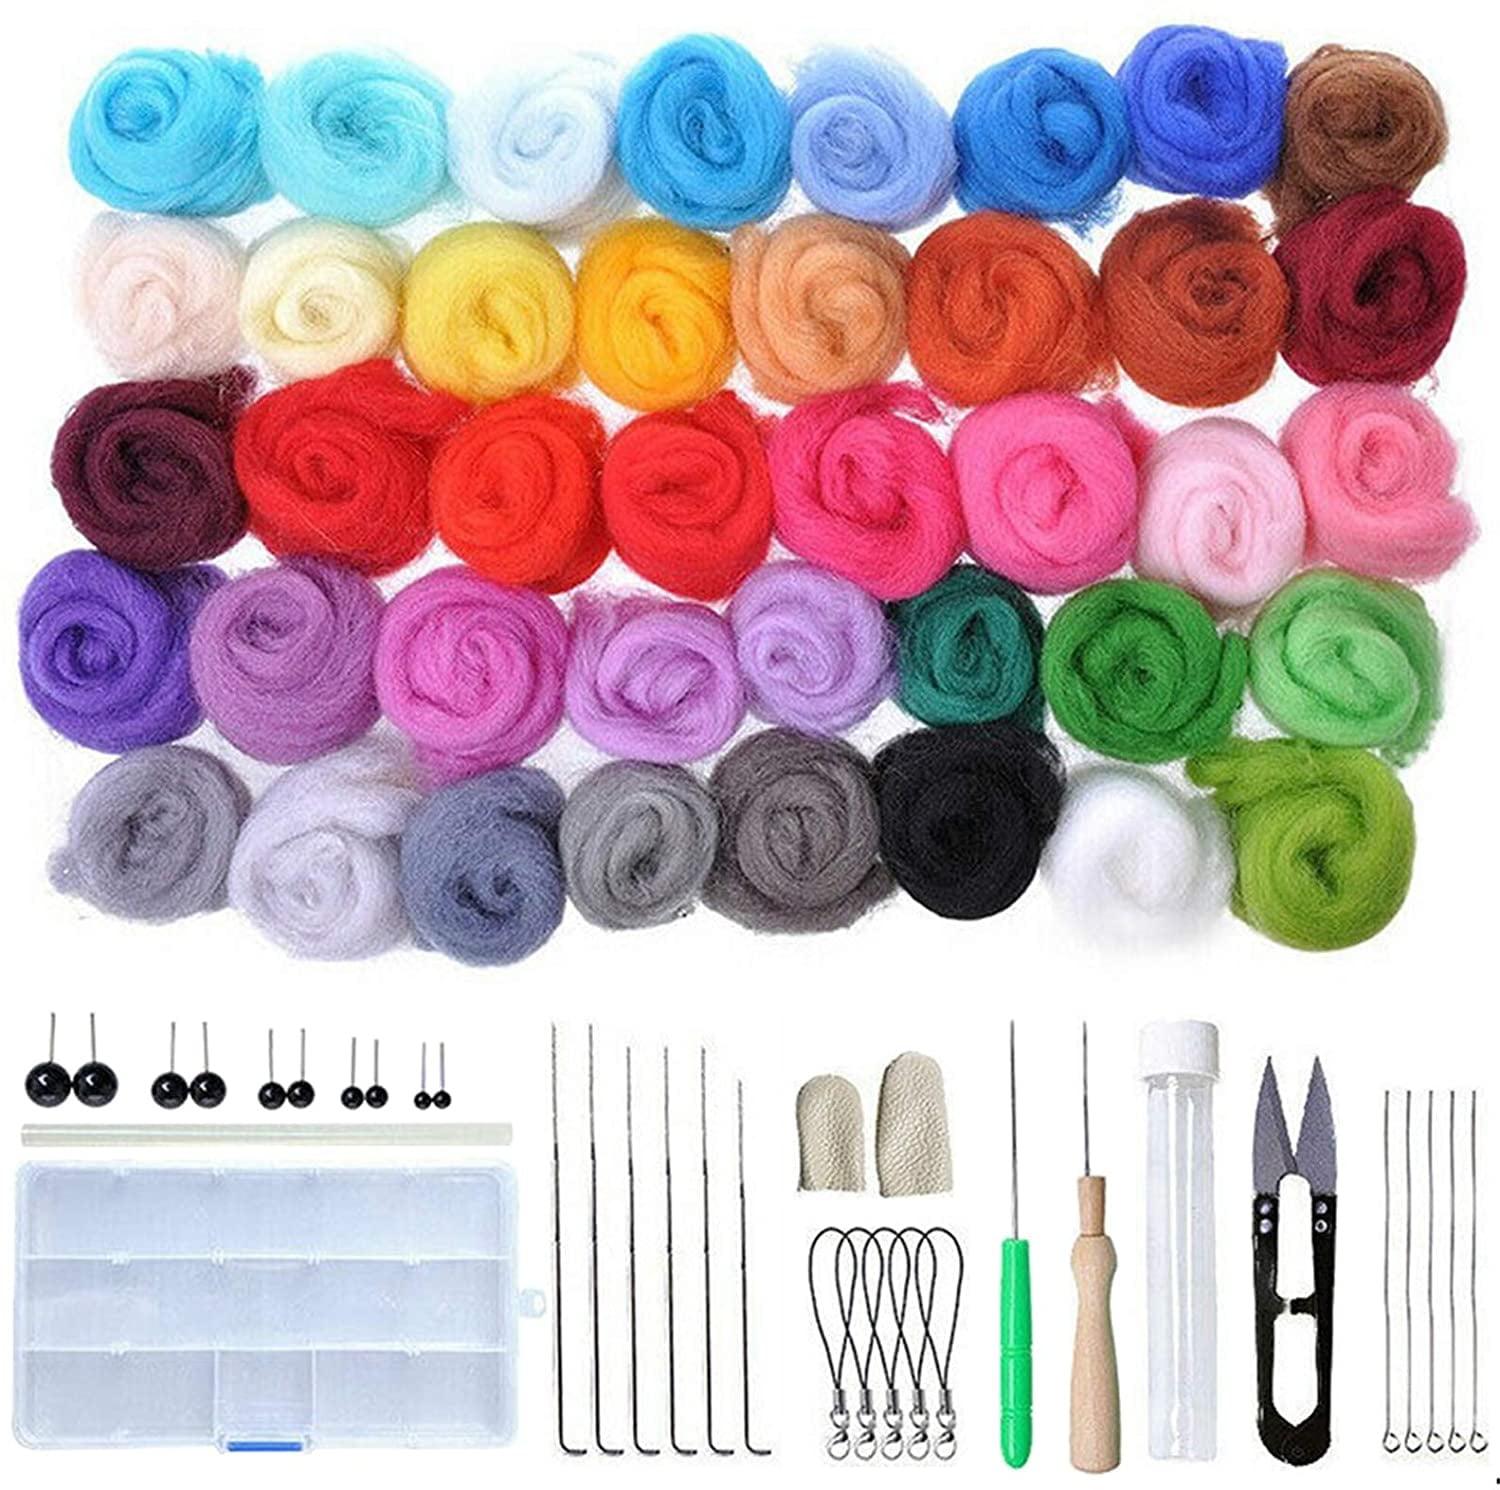  Needle Felting Kit, 32 Colors Wool Roving Set, Needle Felting  Starter Kit for Beginner, Wool Felting Tool Kit with Felting Tool and Foam  Mat, Needle Felting Supplies for DIY, Arts and